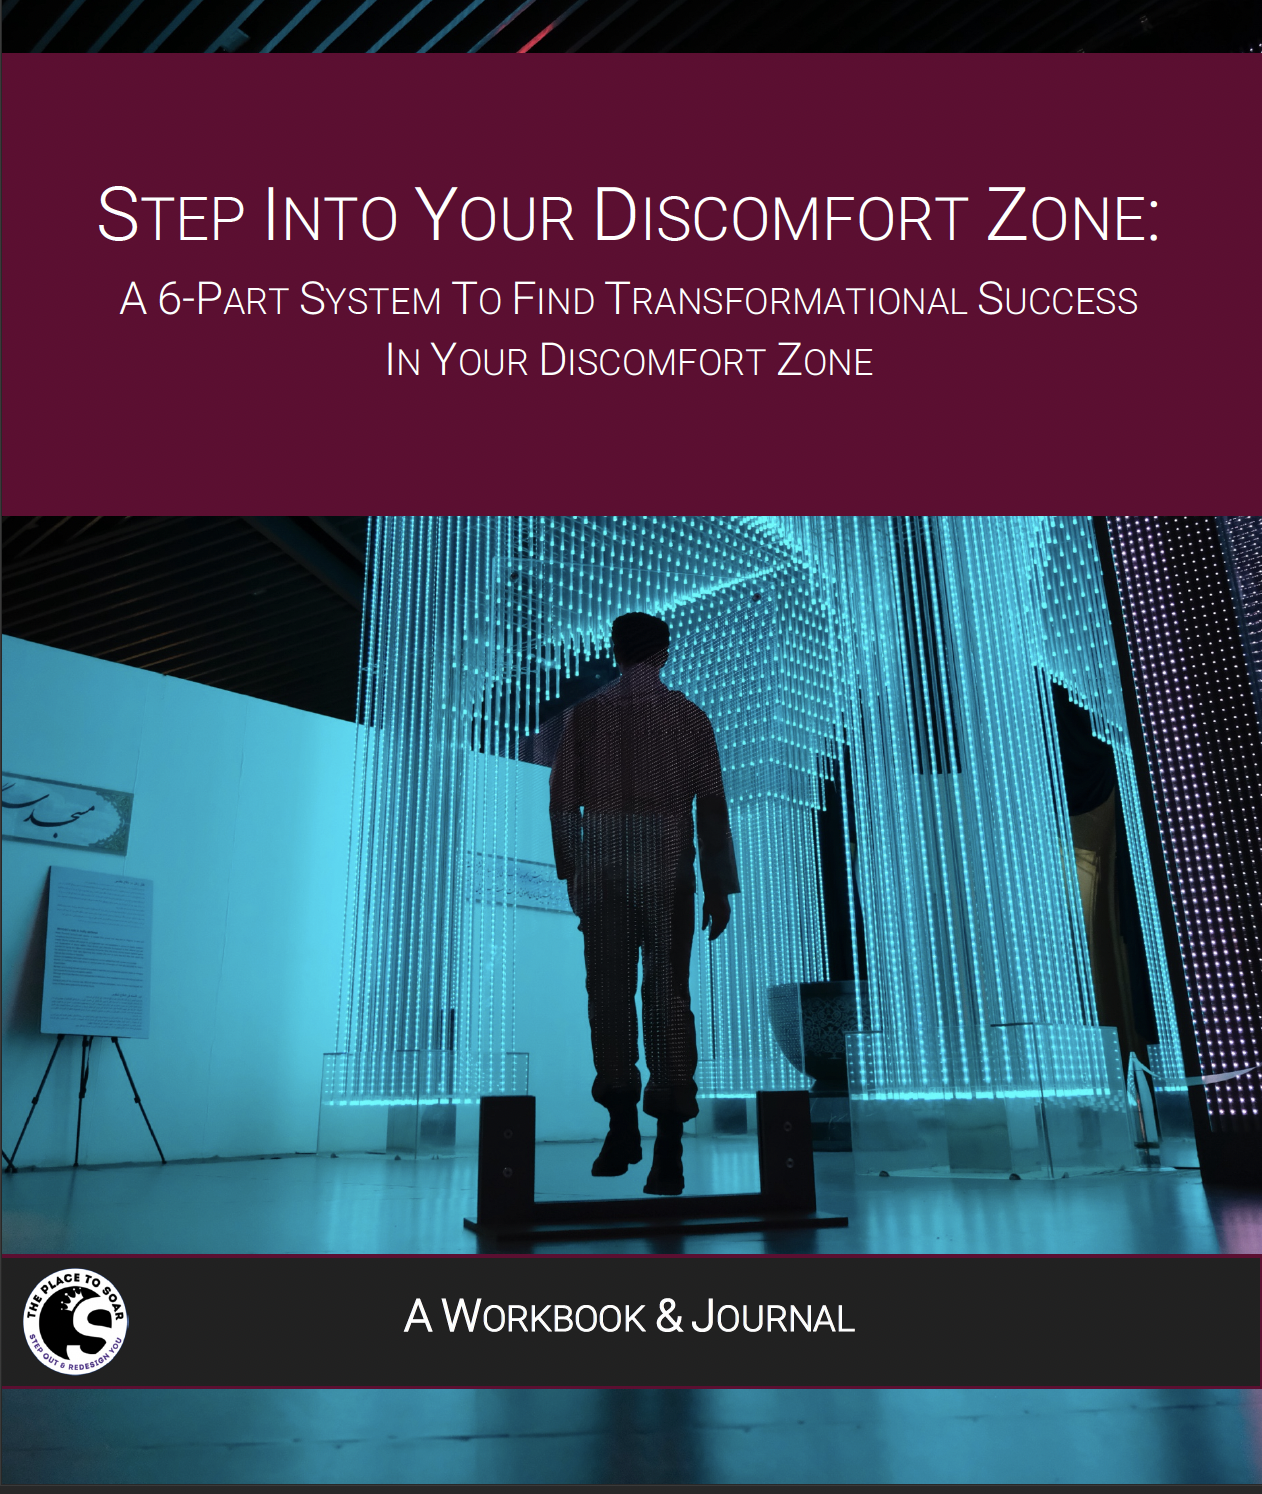 eWorkbook & Journal: Step Into Your Discomfort Zone - A 6-Part System to Find Transformational Success in Your Discomfort Zone